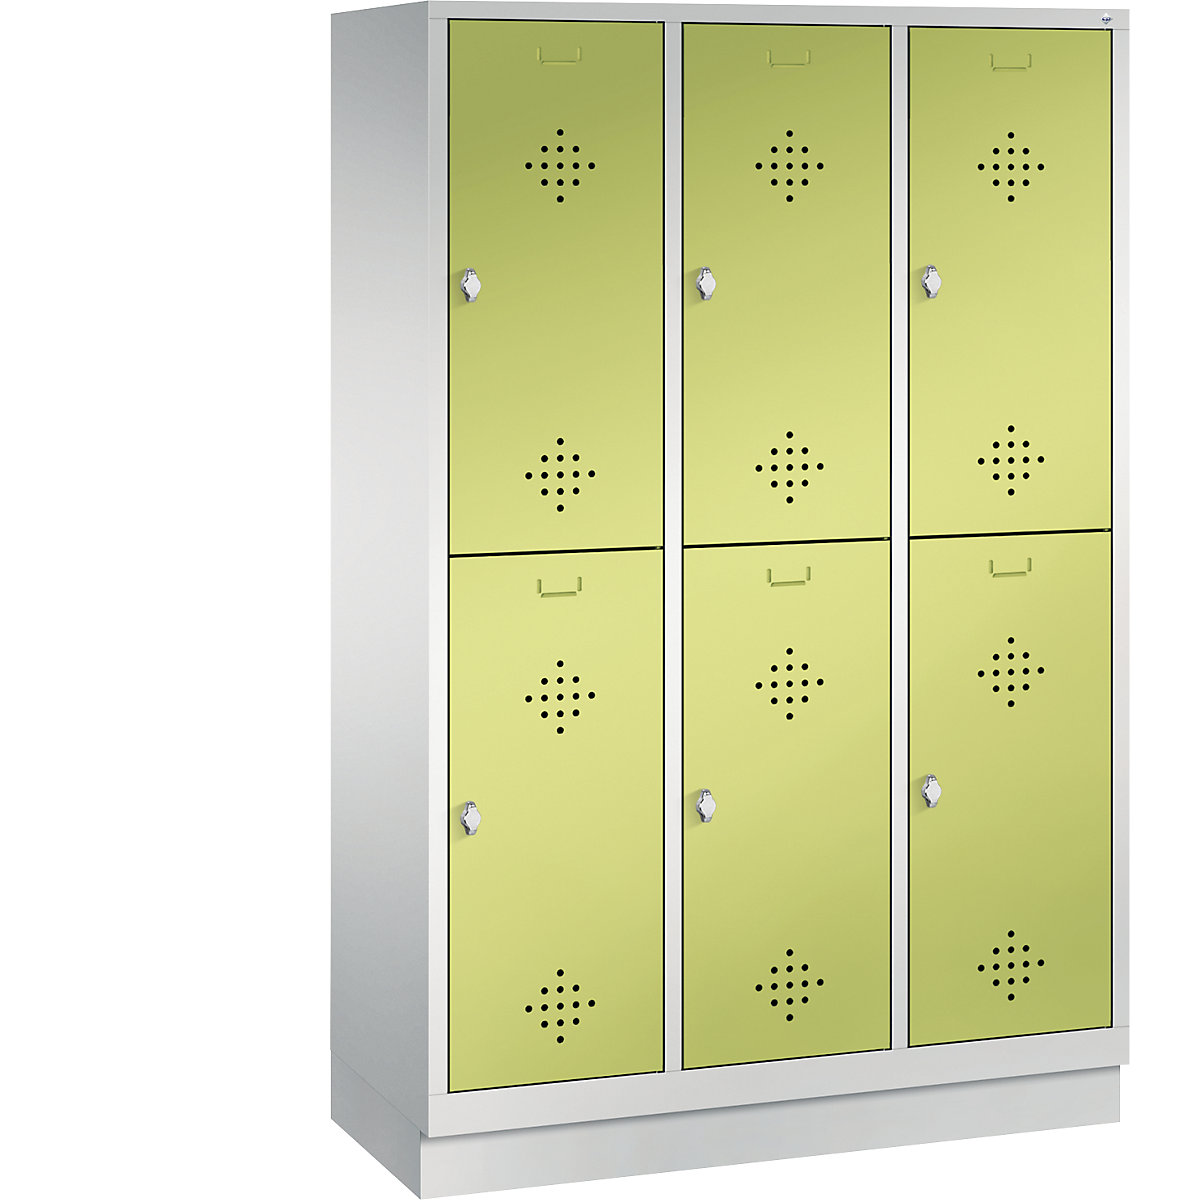 CLASSIC cloakroom locker with plinth, double tier – C+P, 3 compartments, 2 shelf compartments each, compartment width 400 mm, light grey / viridian green-13